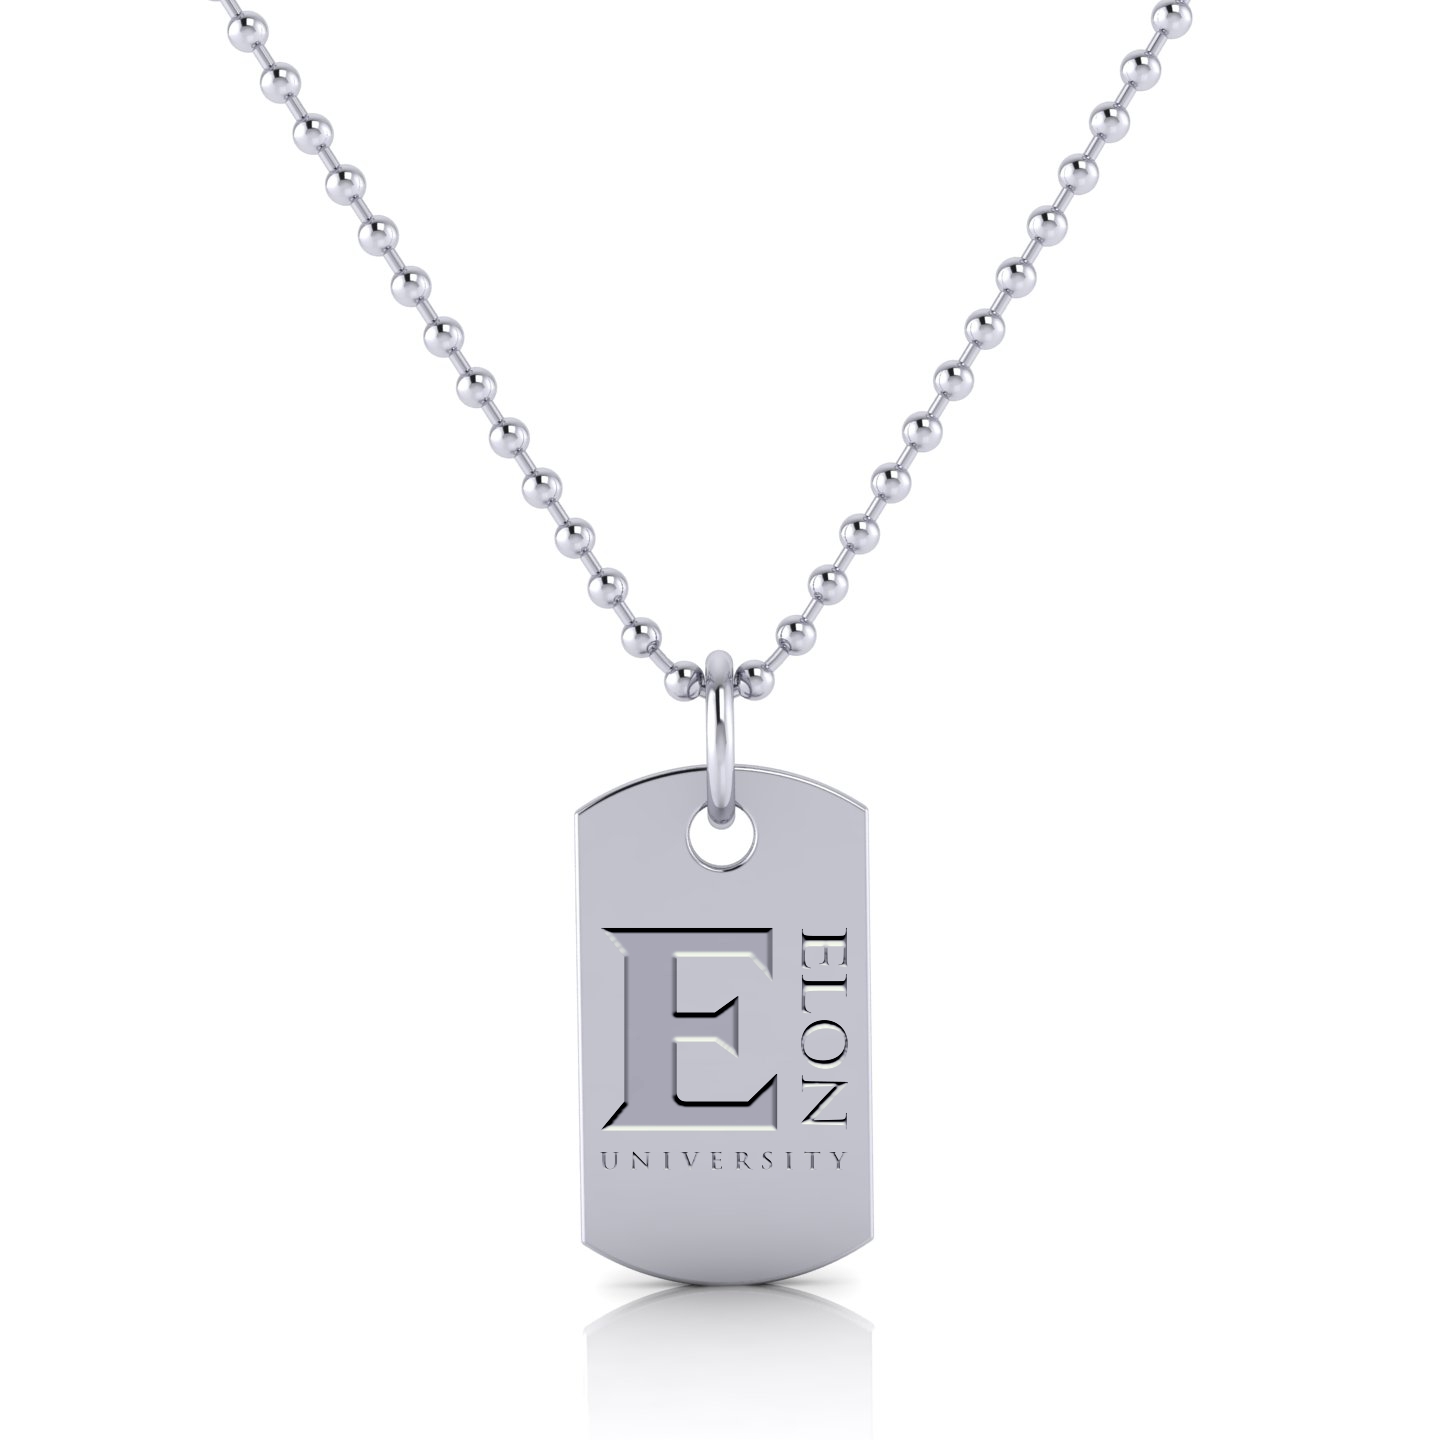 An Elon Squadra E pendant in sterling silver. The pendant is a simple, elegant design with the Elon University "E" logo. The sterling silver is a bright, silver color.